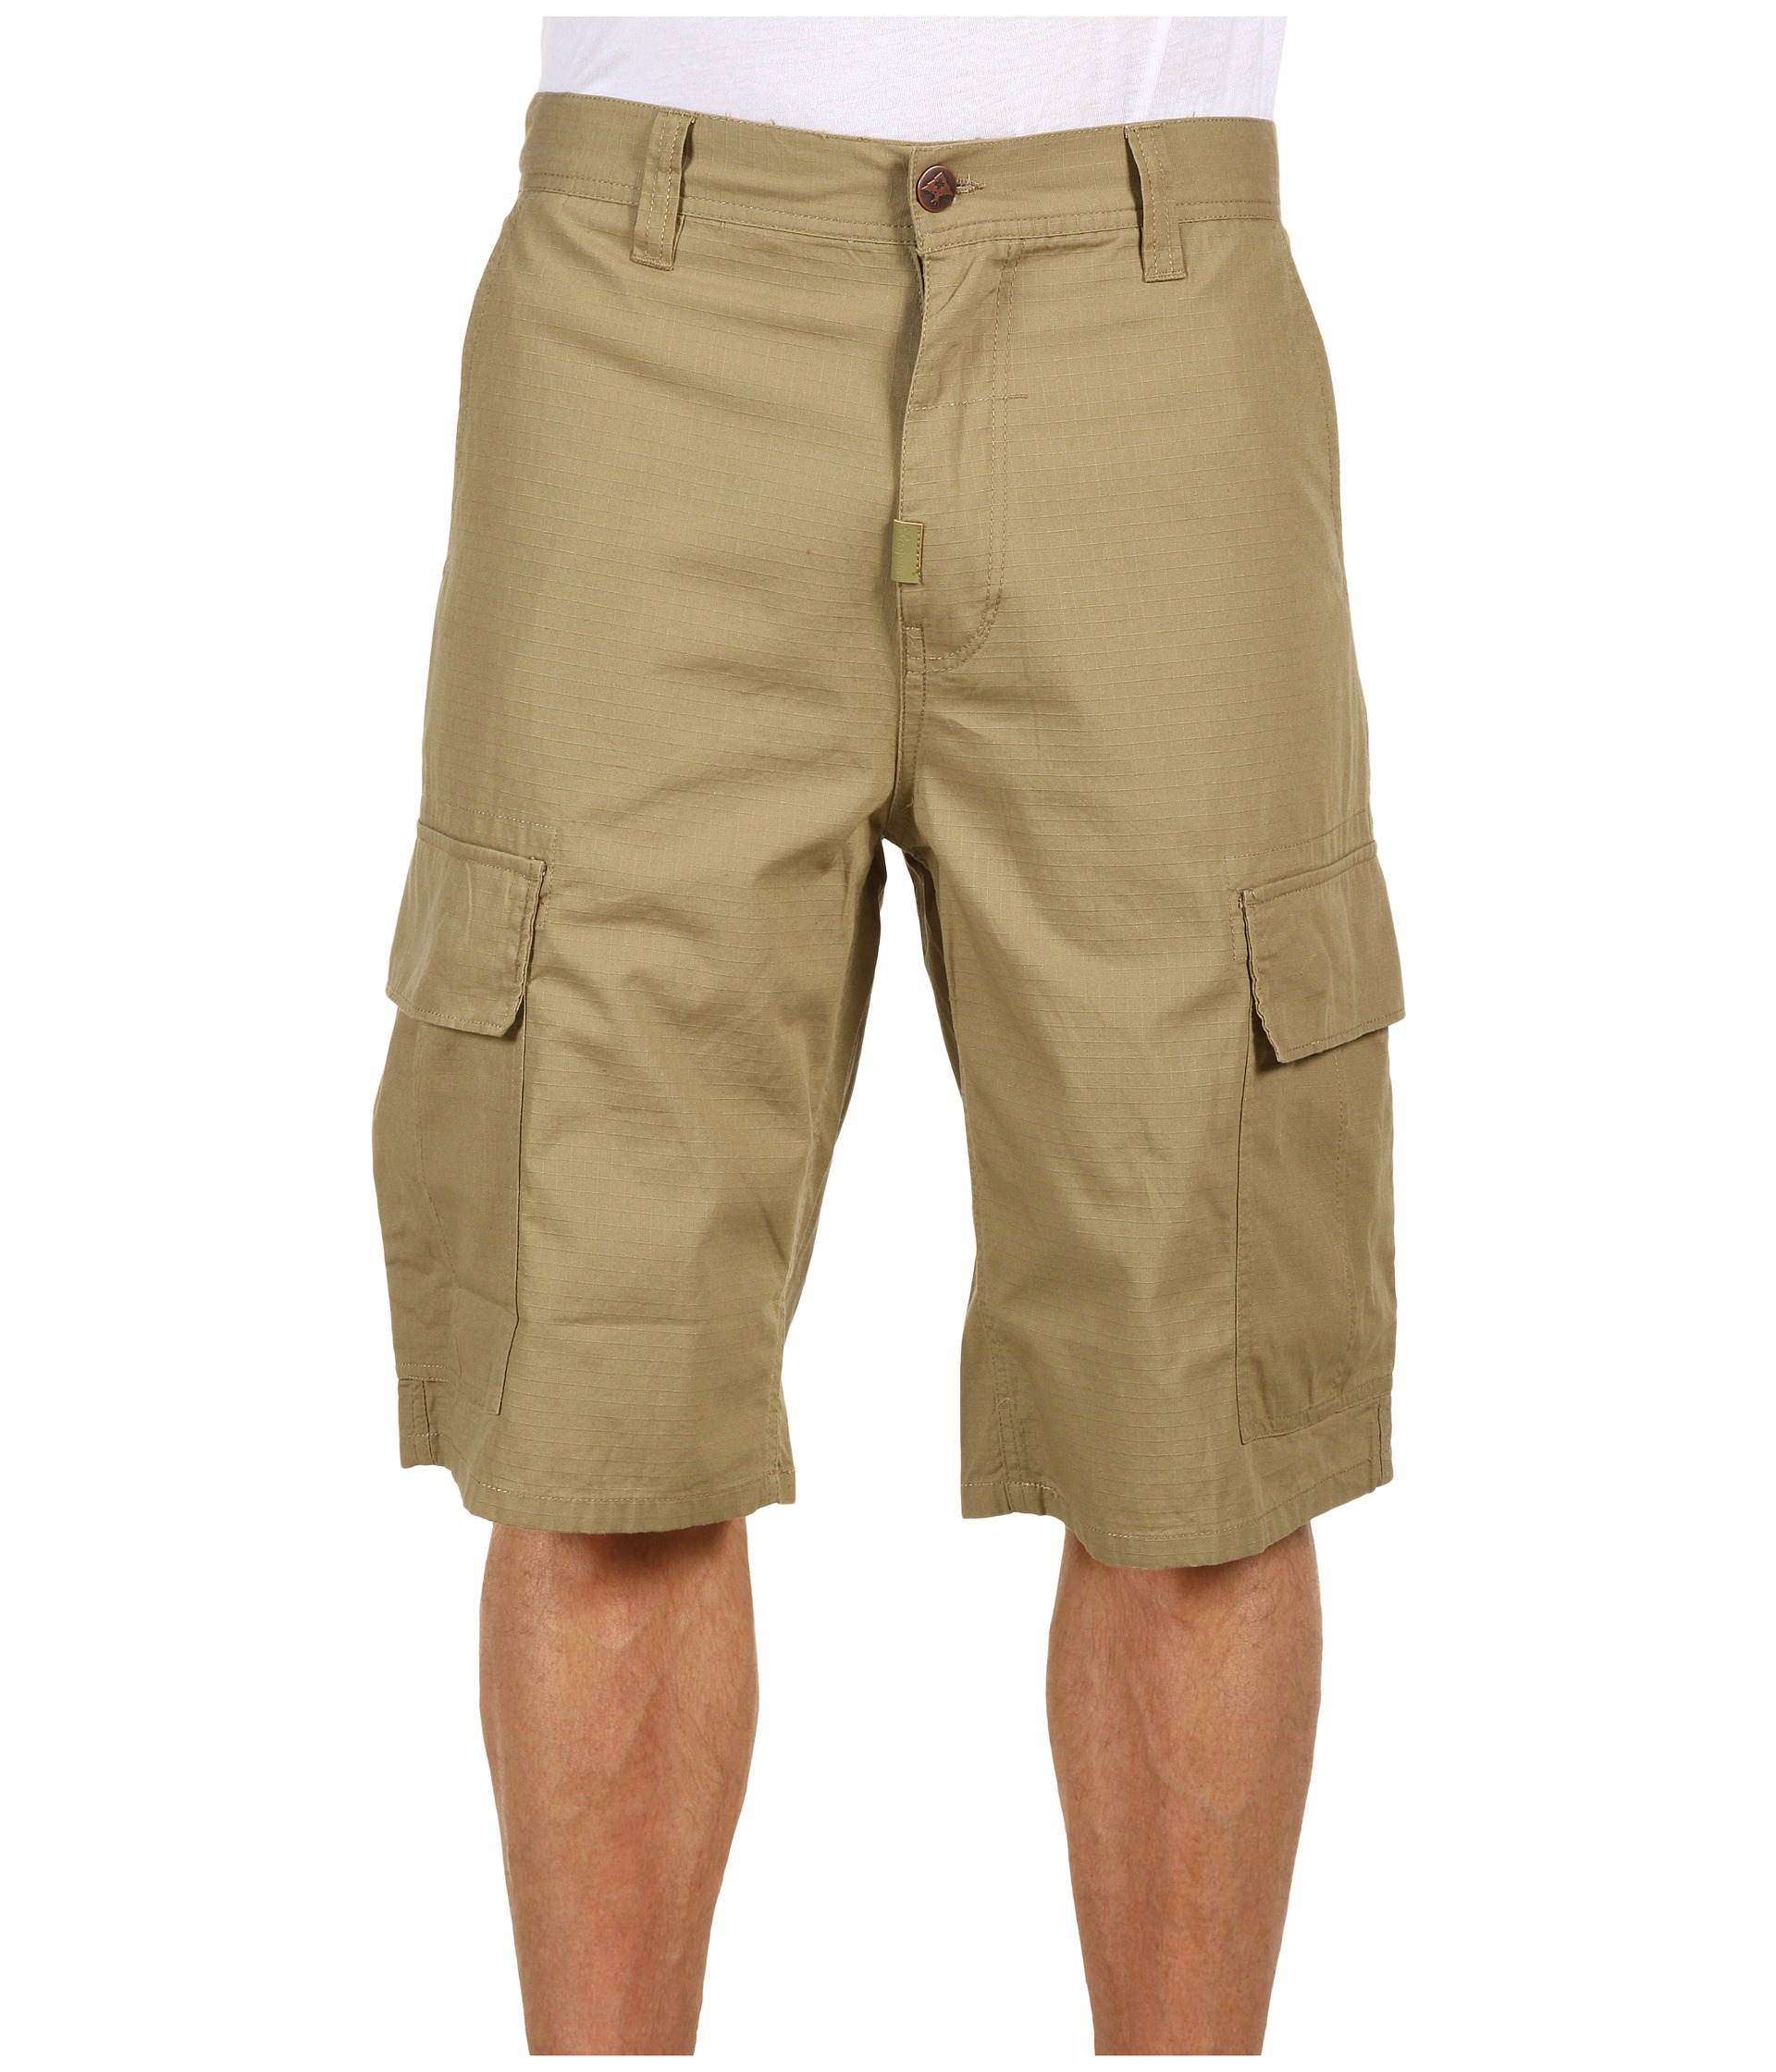   Collection Classic Cargo Short* $47.99 $59.00 